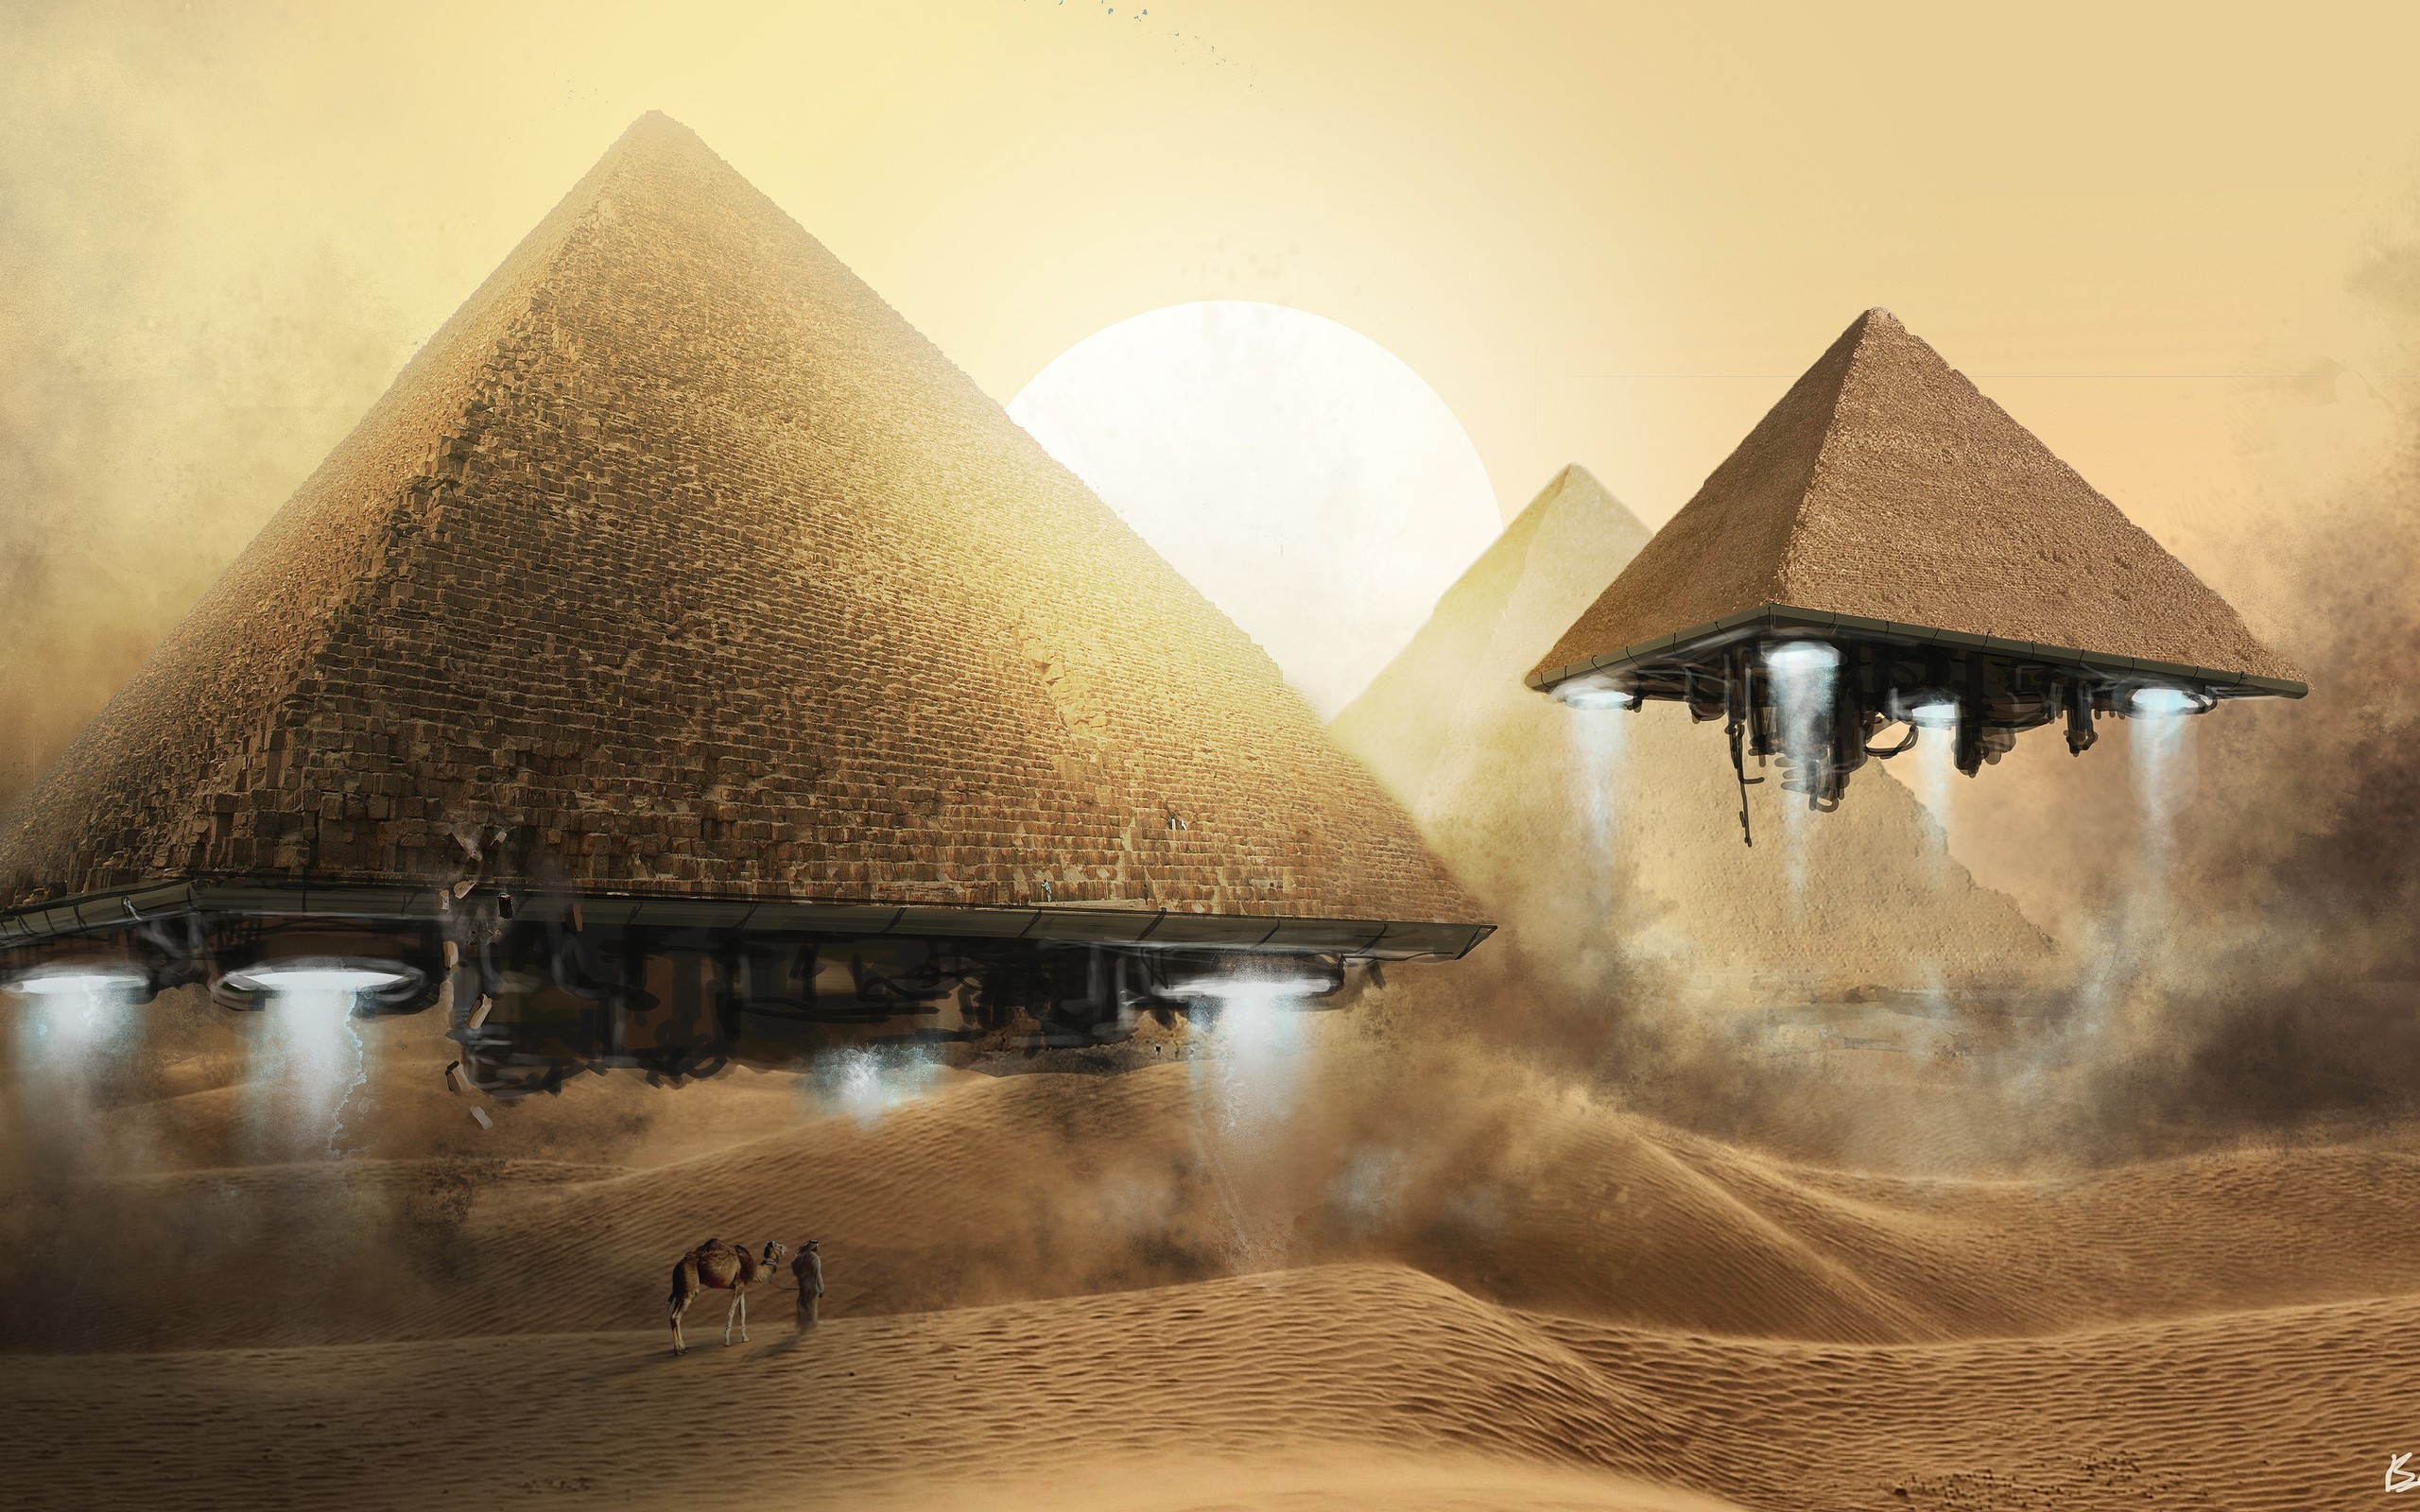 General 2560x1600 pyramid desert Egypt camels sand abstract science fiction digital art watermarked